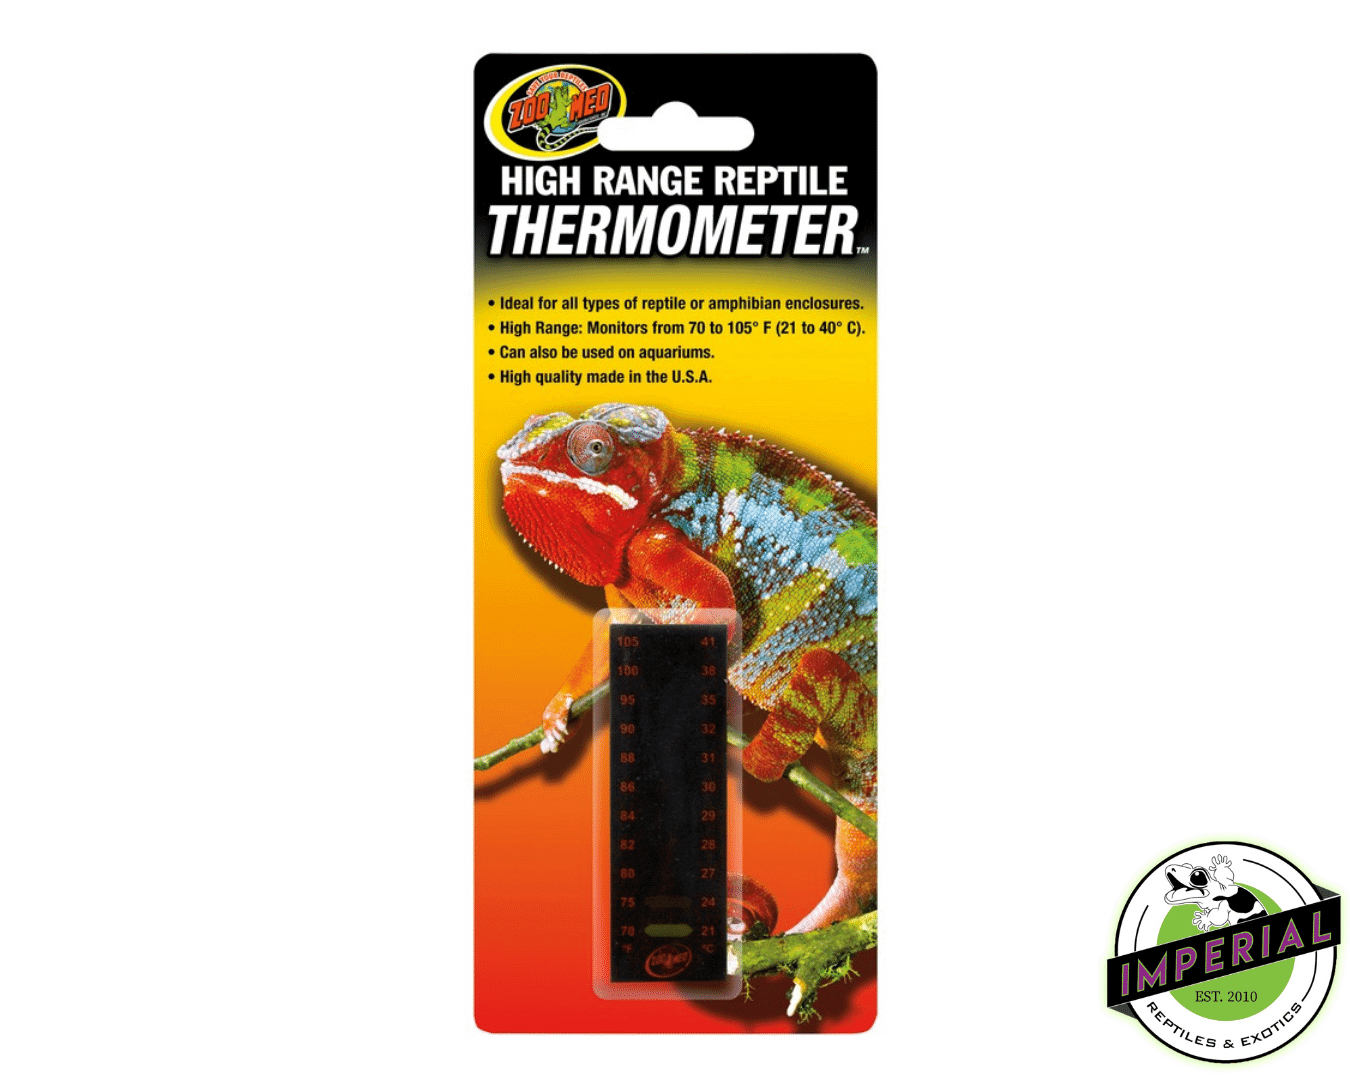 high range reptile thermometer for sale online, buy cheap reptile supplies near me